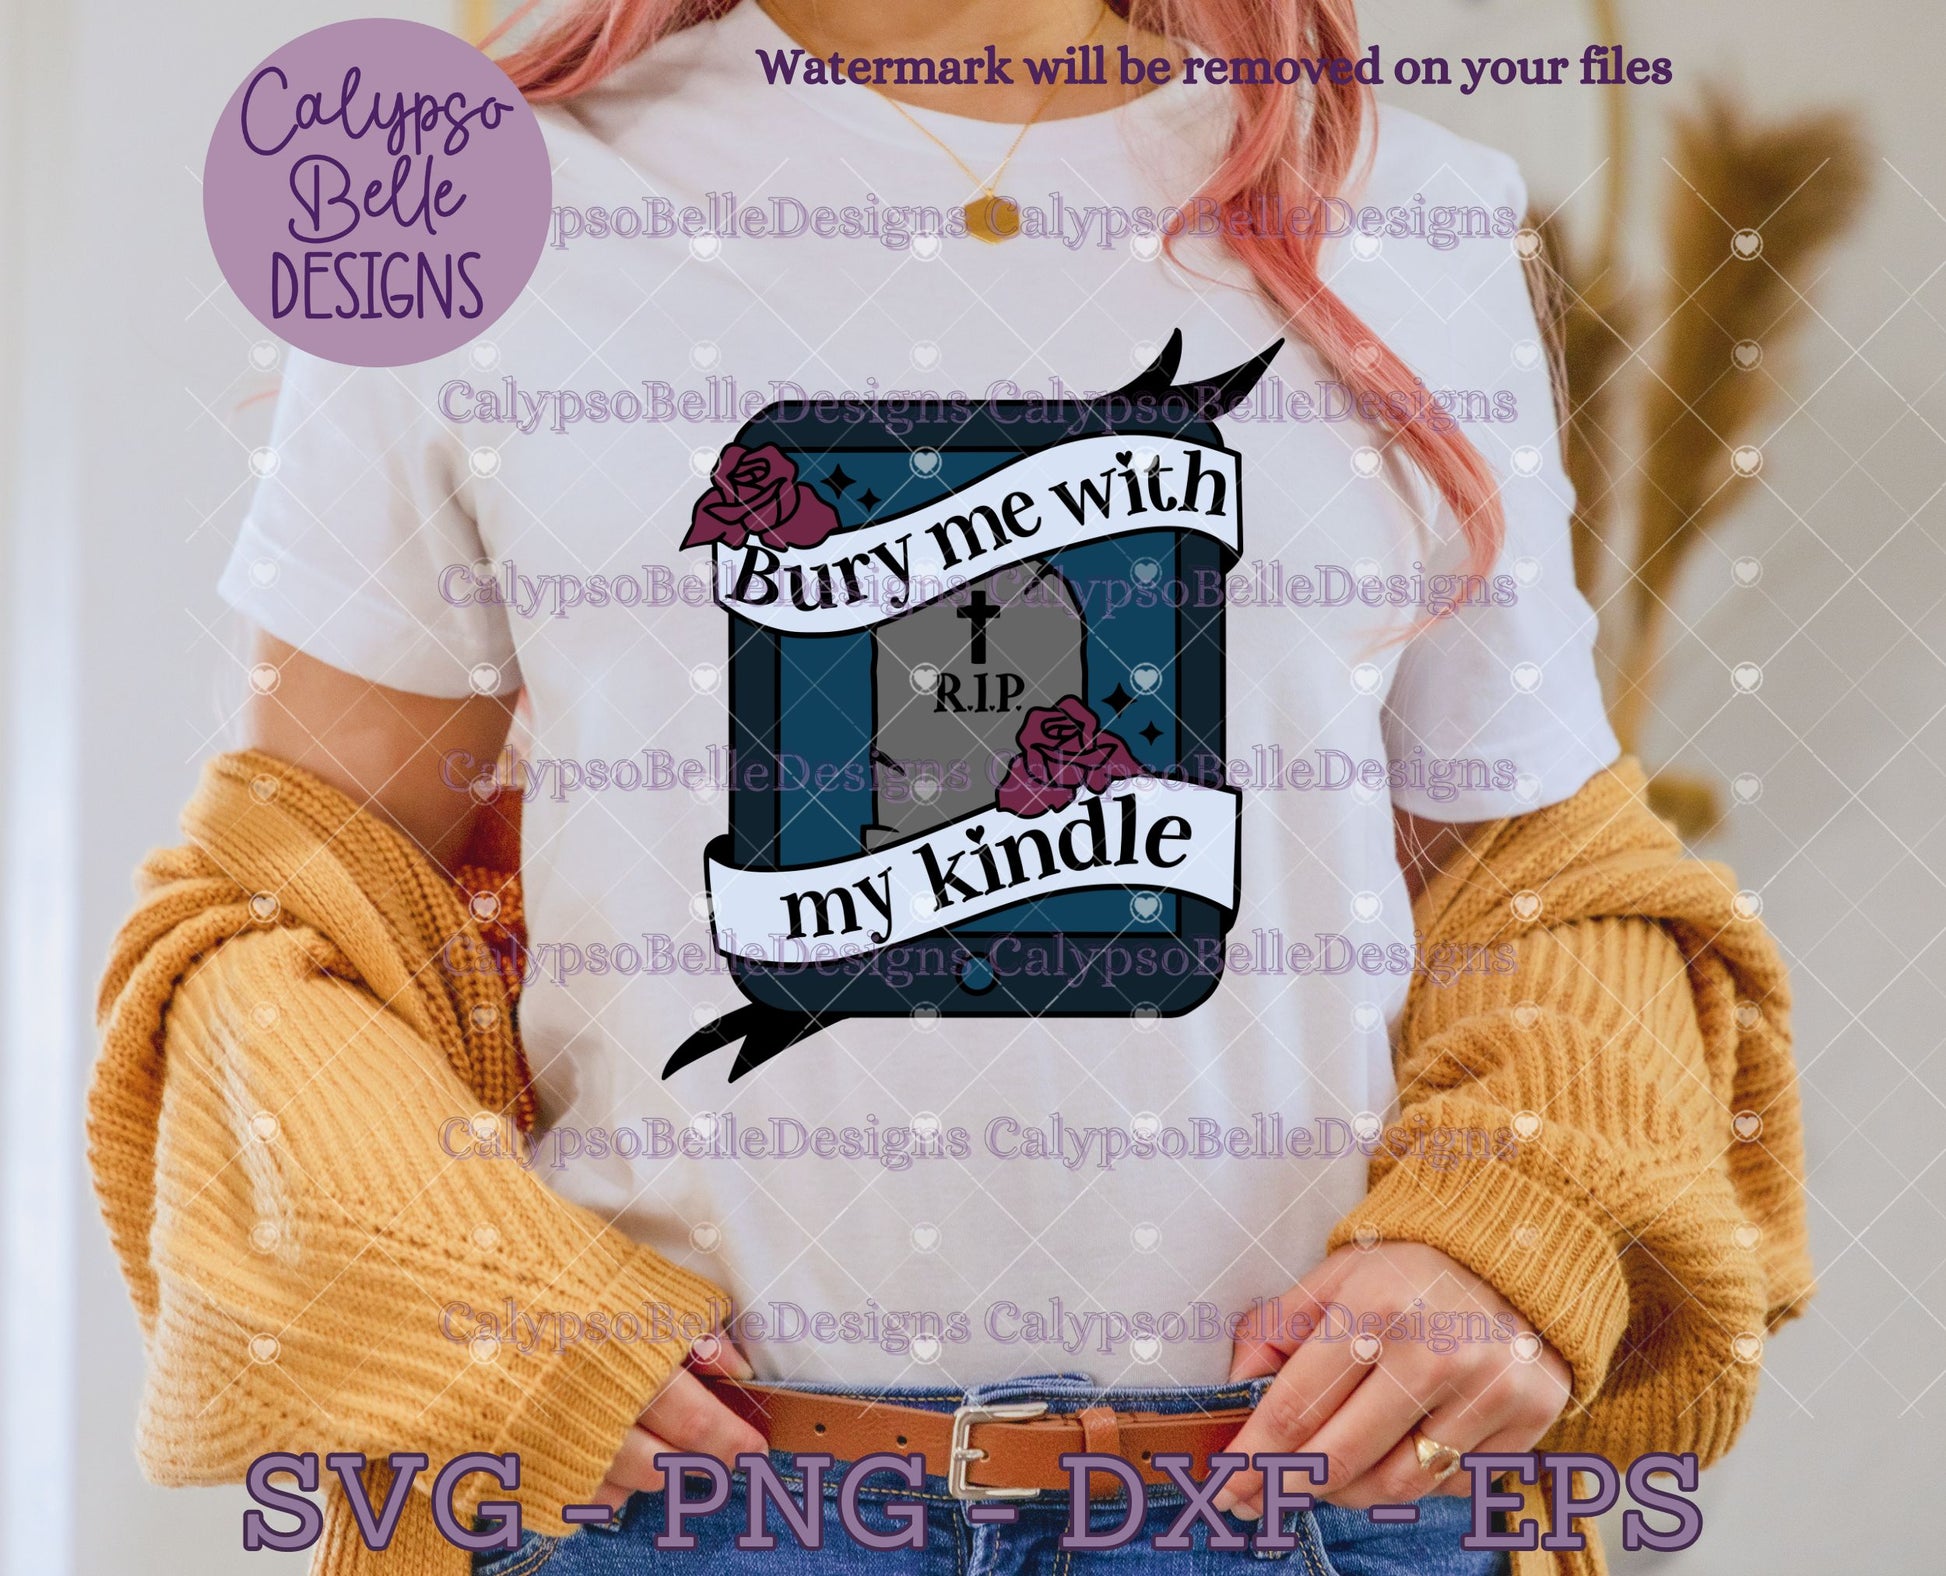 ♥ Personalising my new Kindle ♥, Gallery posted by ෆ mys ෆ